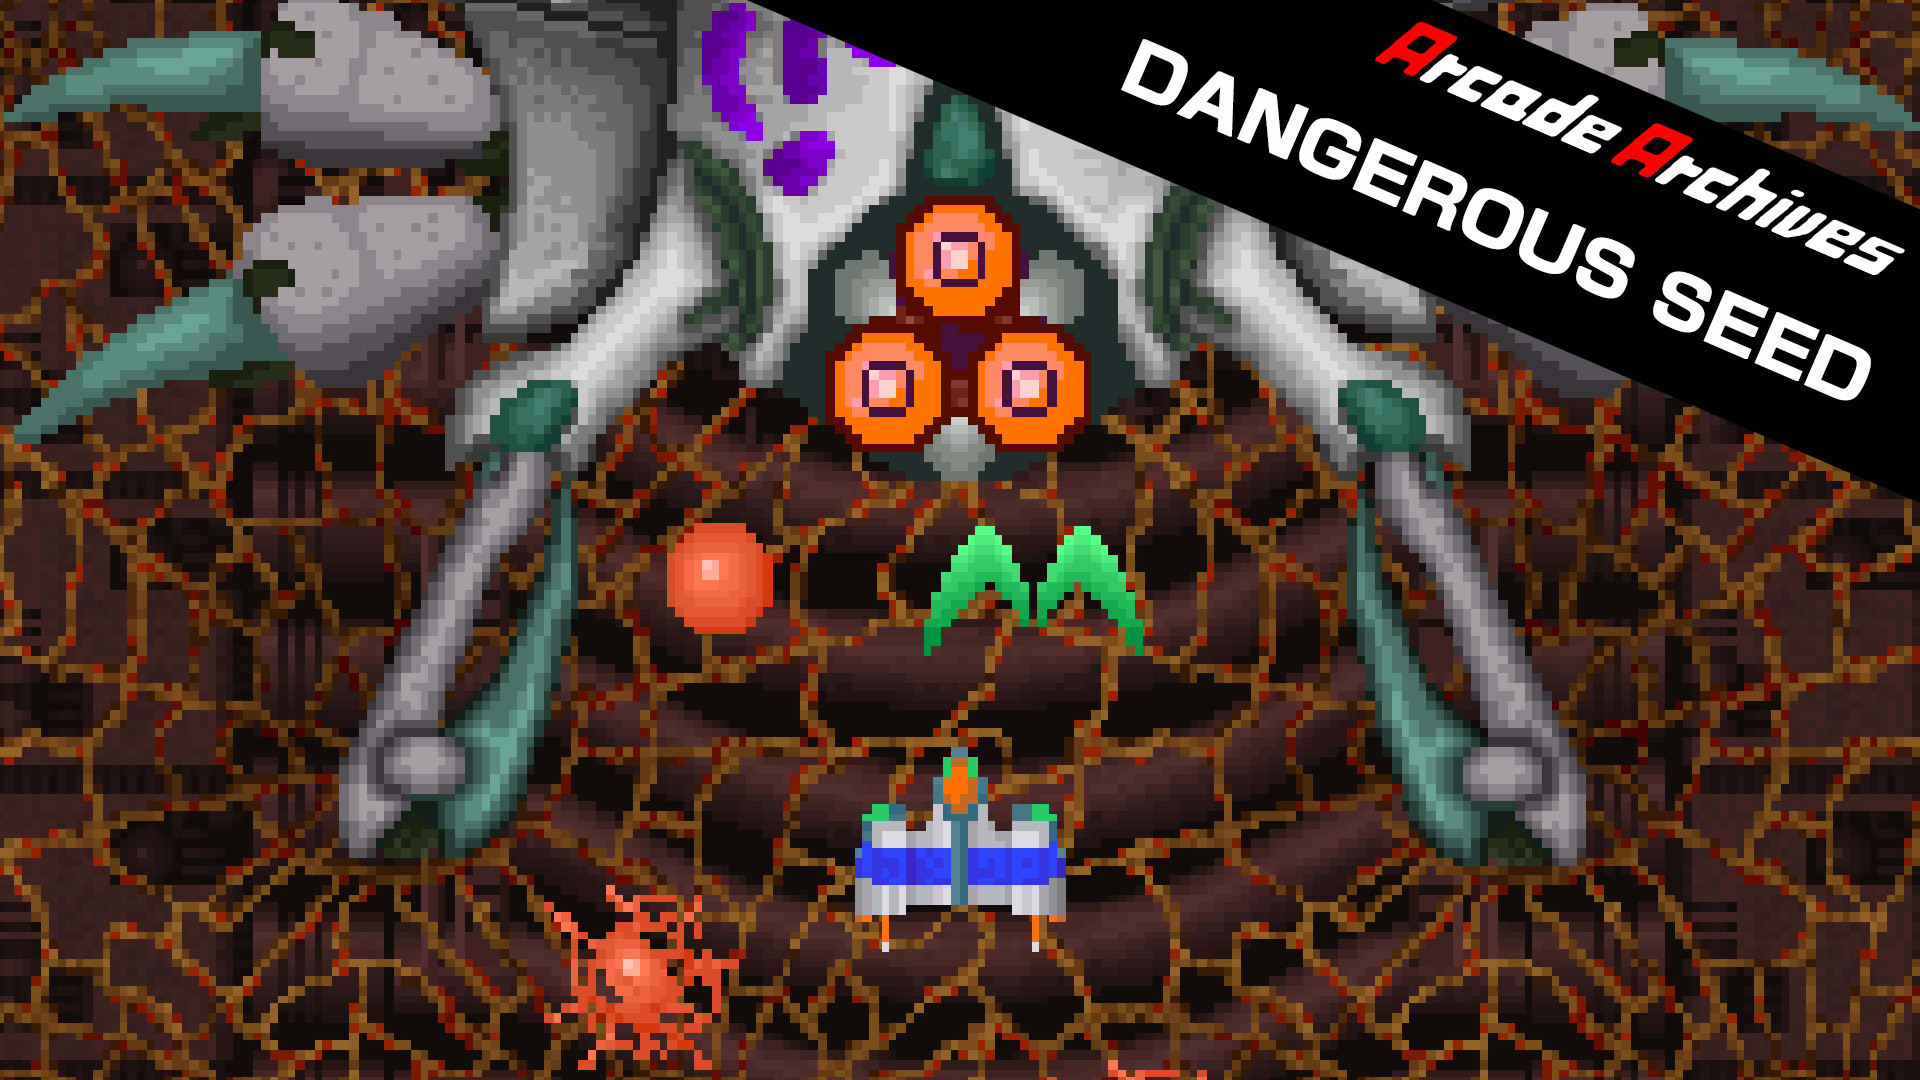 Arcade Archives DANGEROUS SEED 1